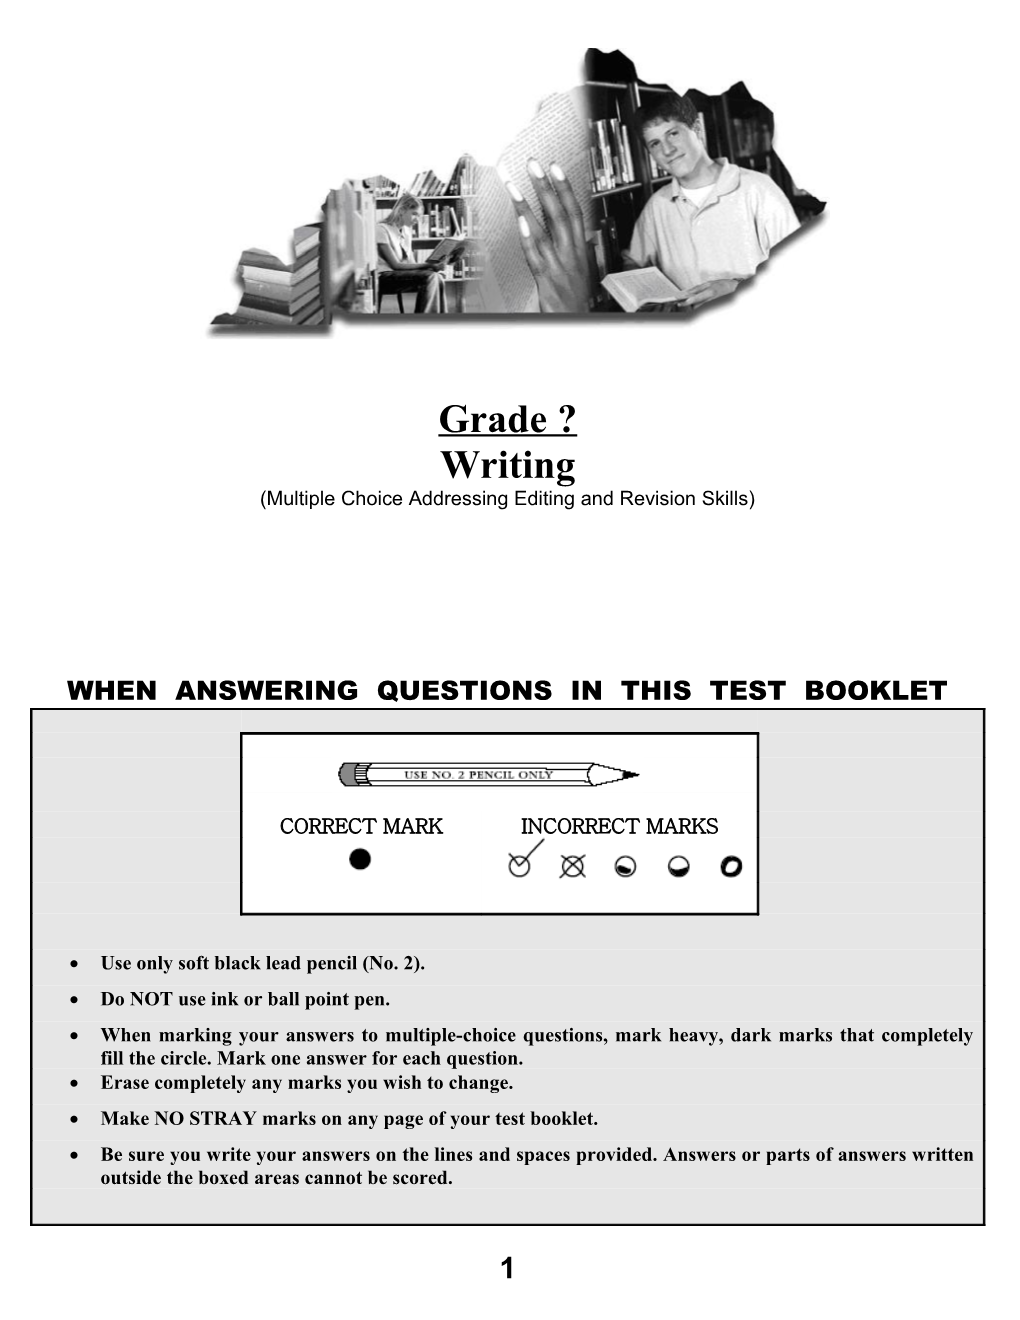 Multiple Choice Addressing Editing and Revision Skills